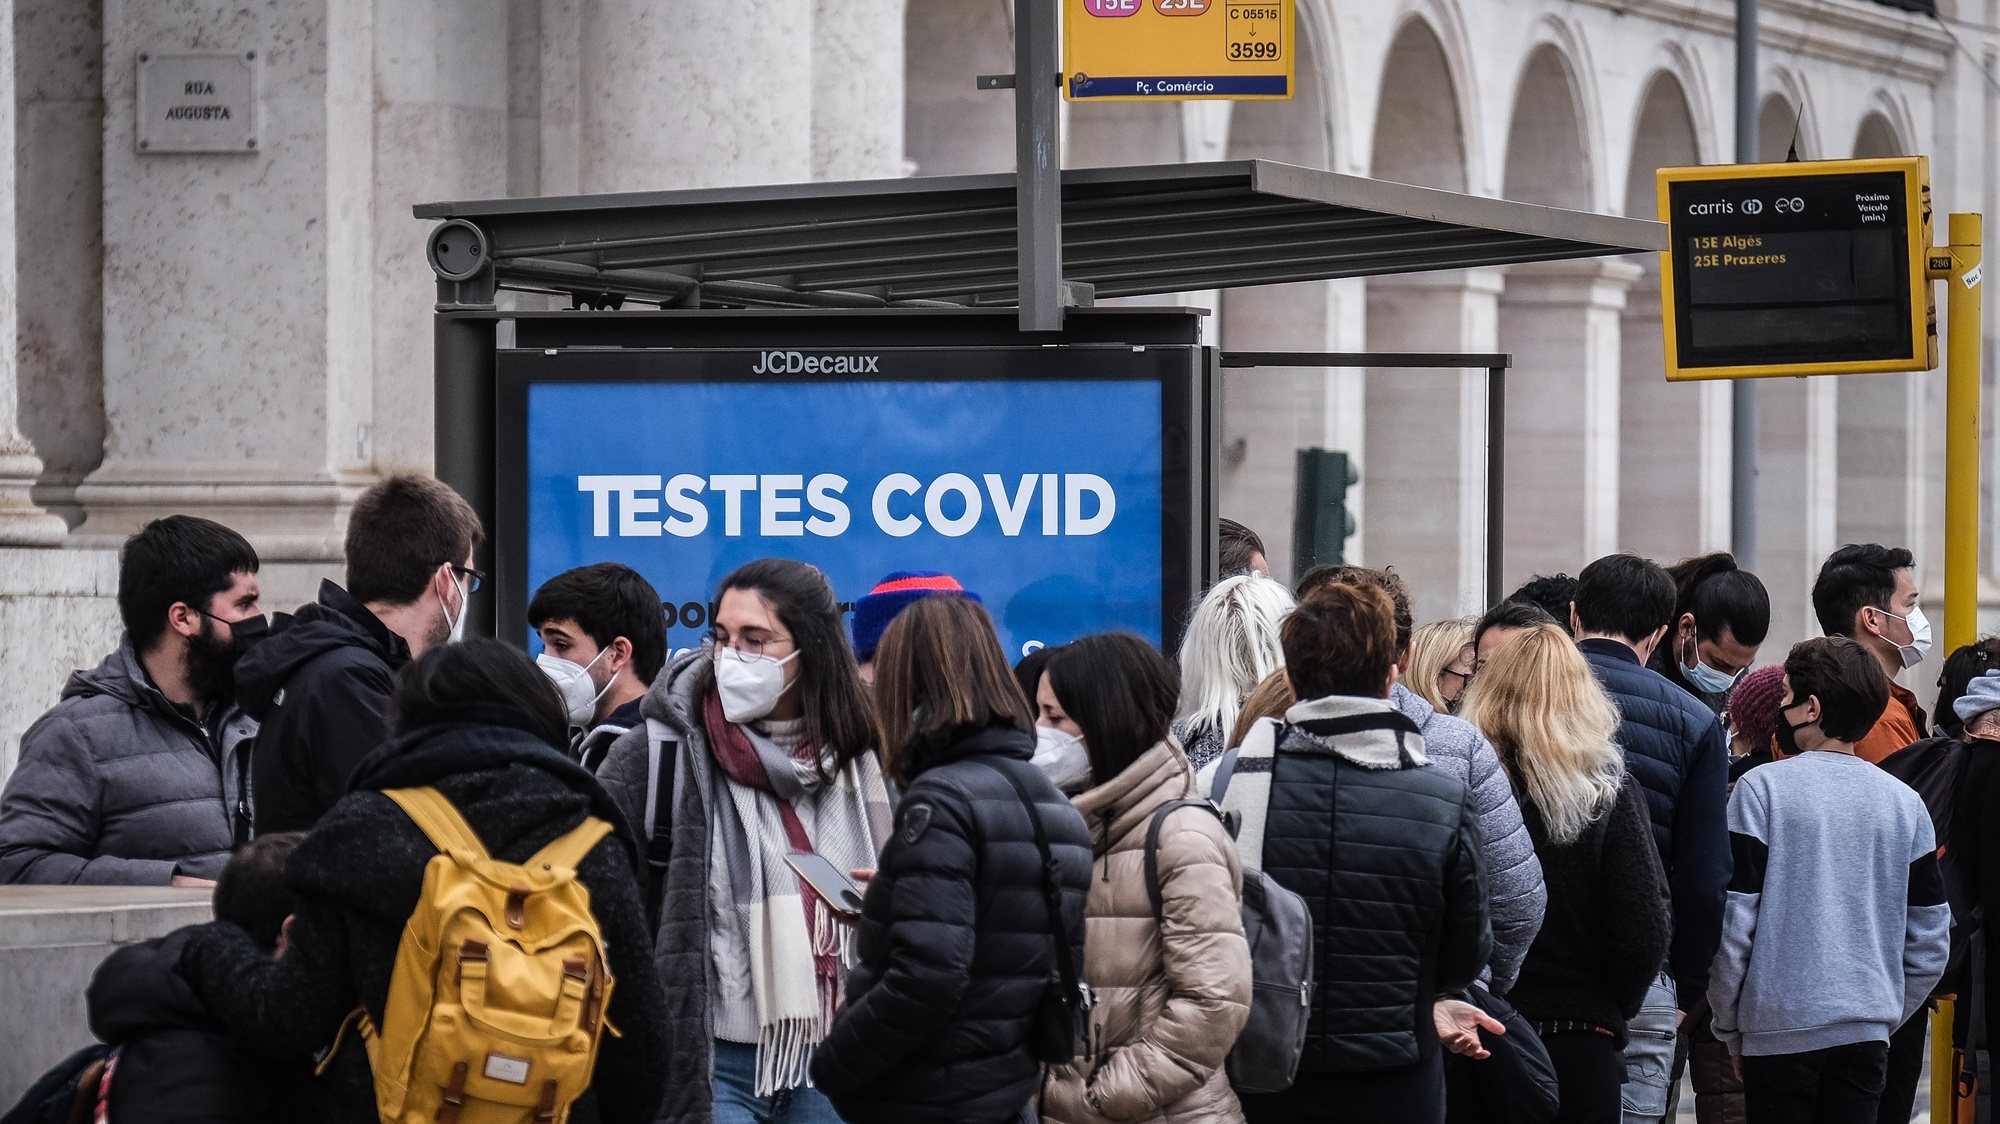 People waiting for a bus next to a sign advertising covid testing in Lisbon, Portugal, 30 December 2021. Yesterday, Portugal registered 26,867 new covid-19 infections, a new high since the start of the pandemic. Due to the surge of positive cases and the rise of the Omicron variant Portugal&#039;s government decided to implement restrictive measures such as closing schools, bars and clubs. MARIO CRUZ/LUSA